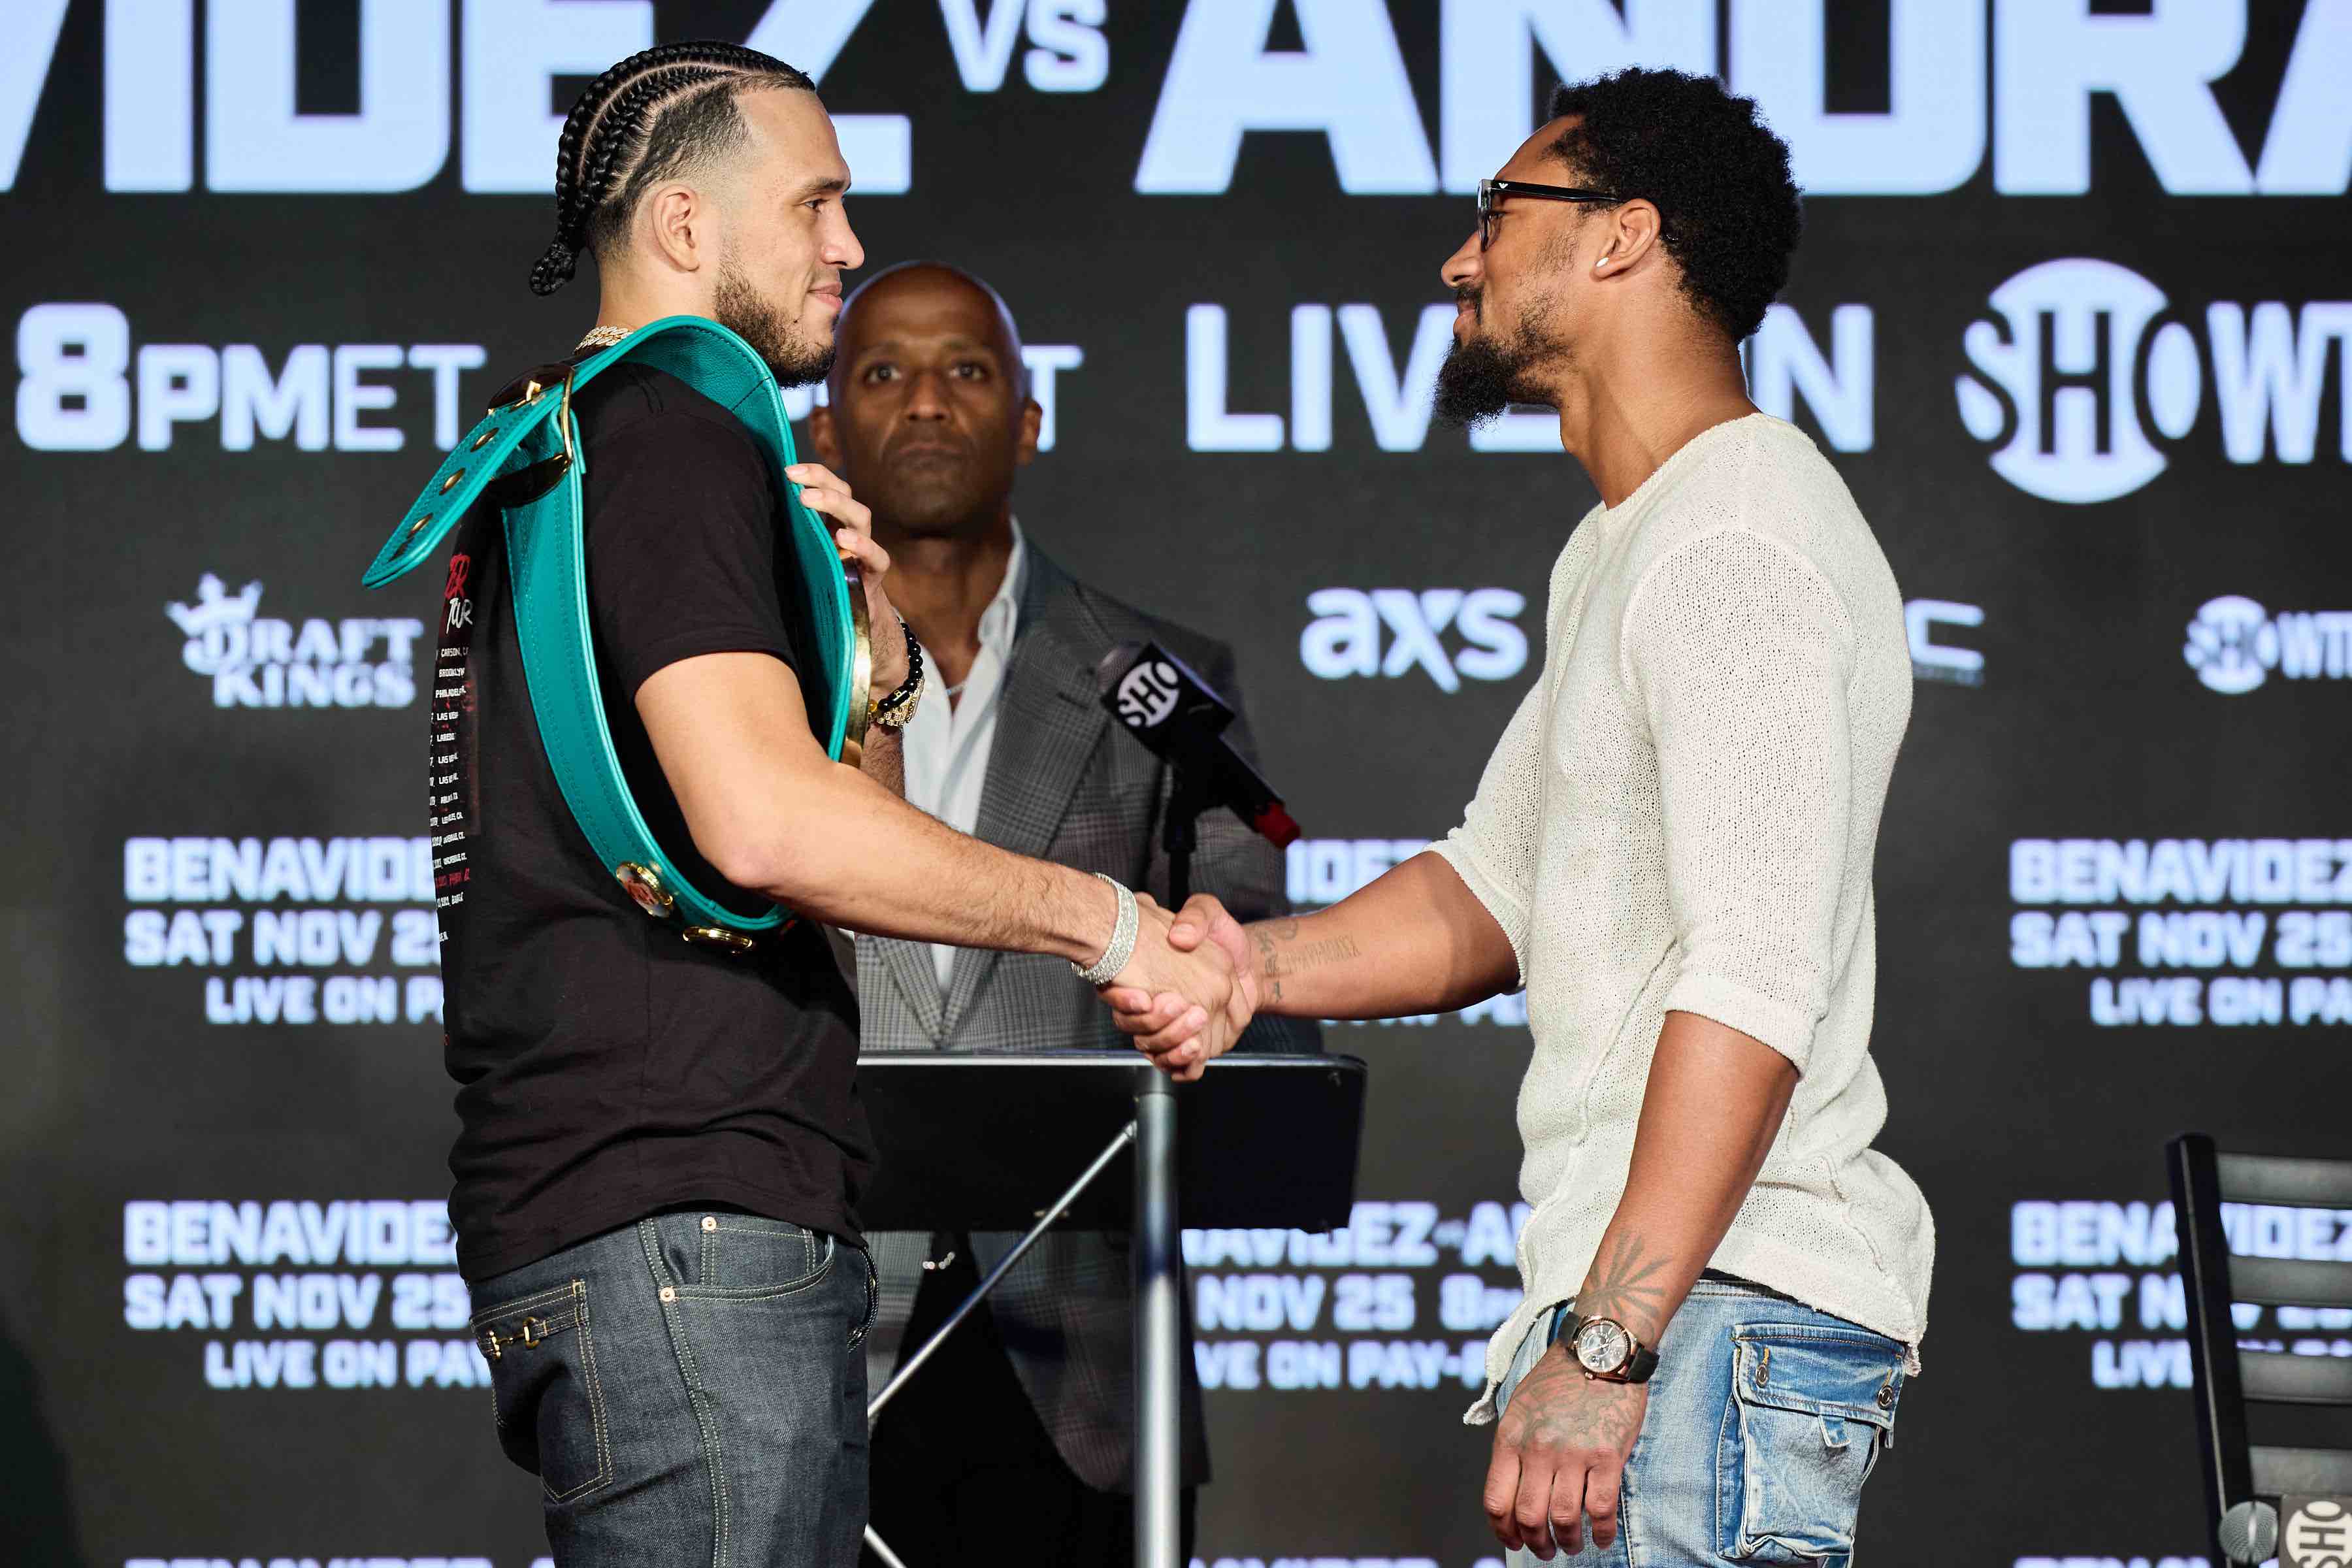 Benavidez-Andrade rate each other before PPV fight